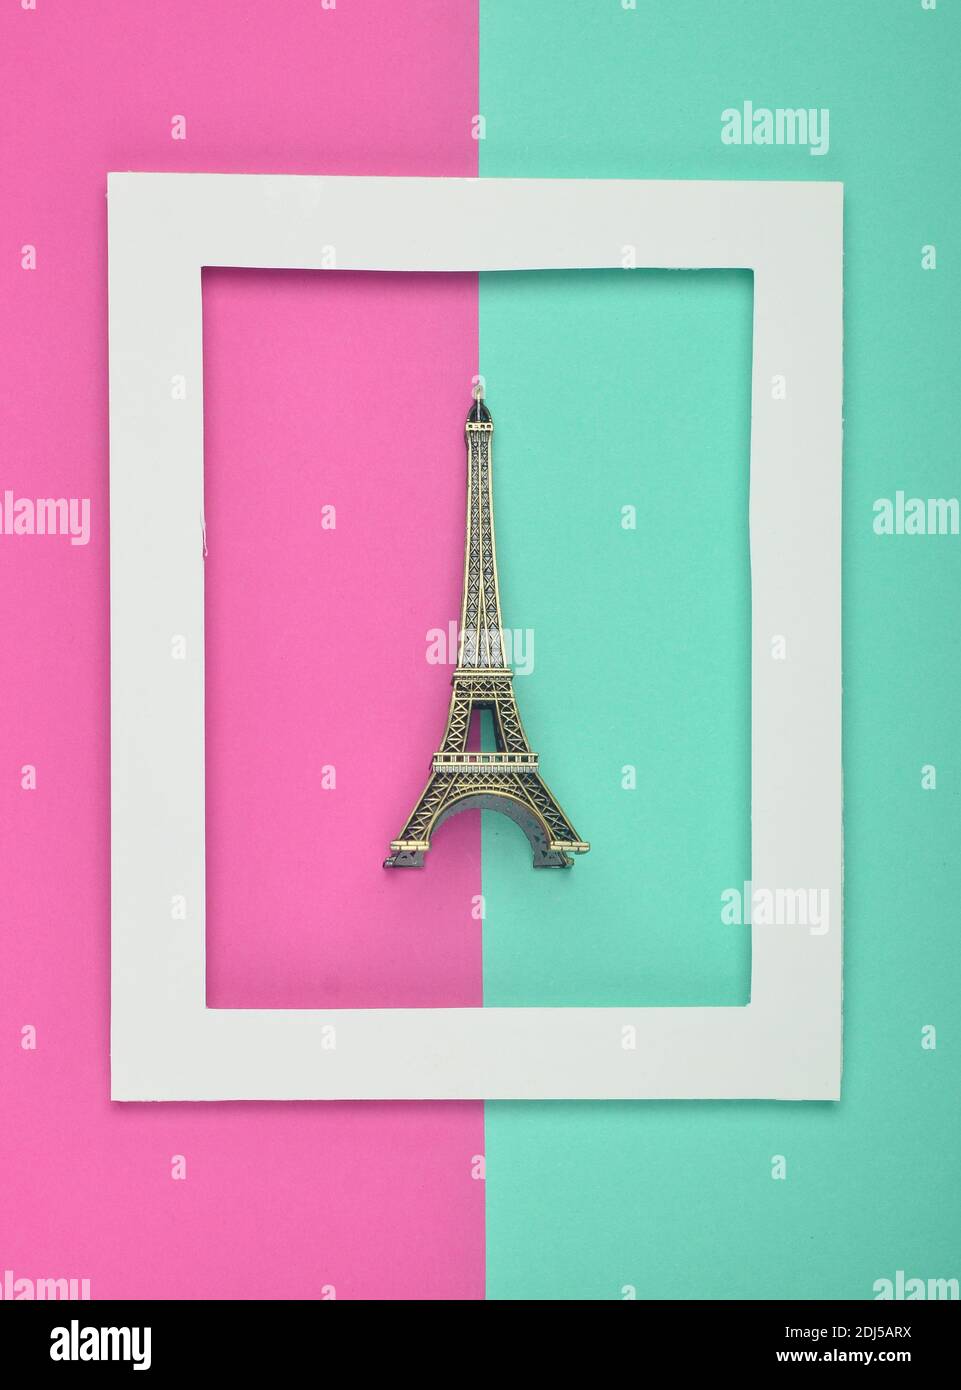 Souvenir statuette of the Eiffel tower in a white frame on a colored pastel background. Minimalist trend. Top view. Stock Photo